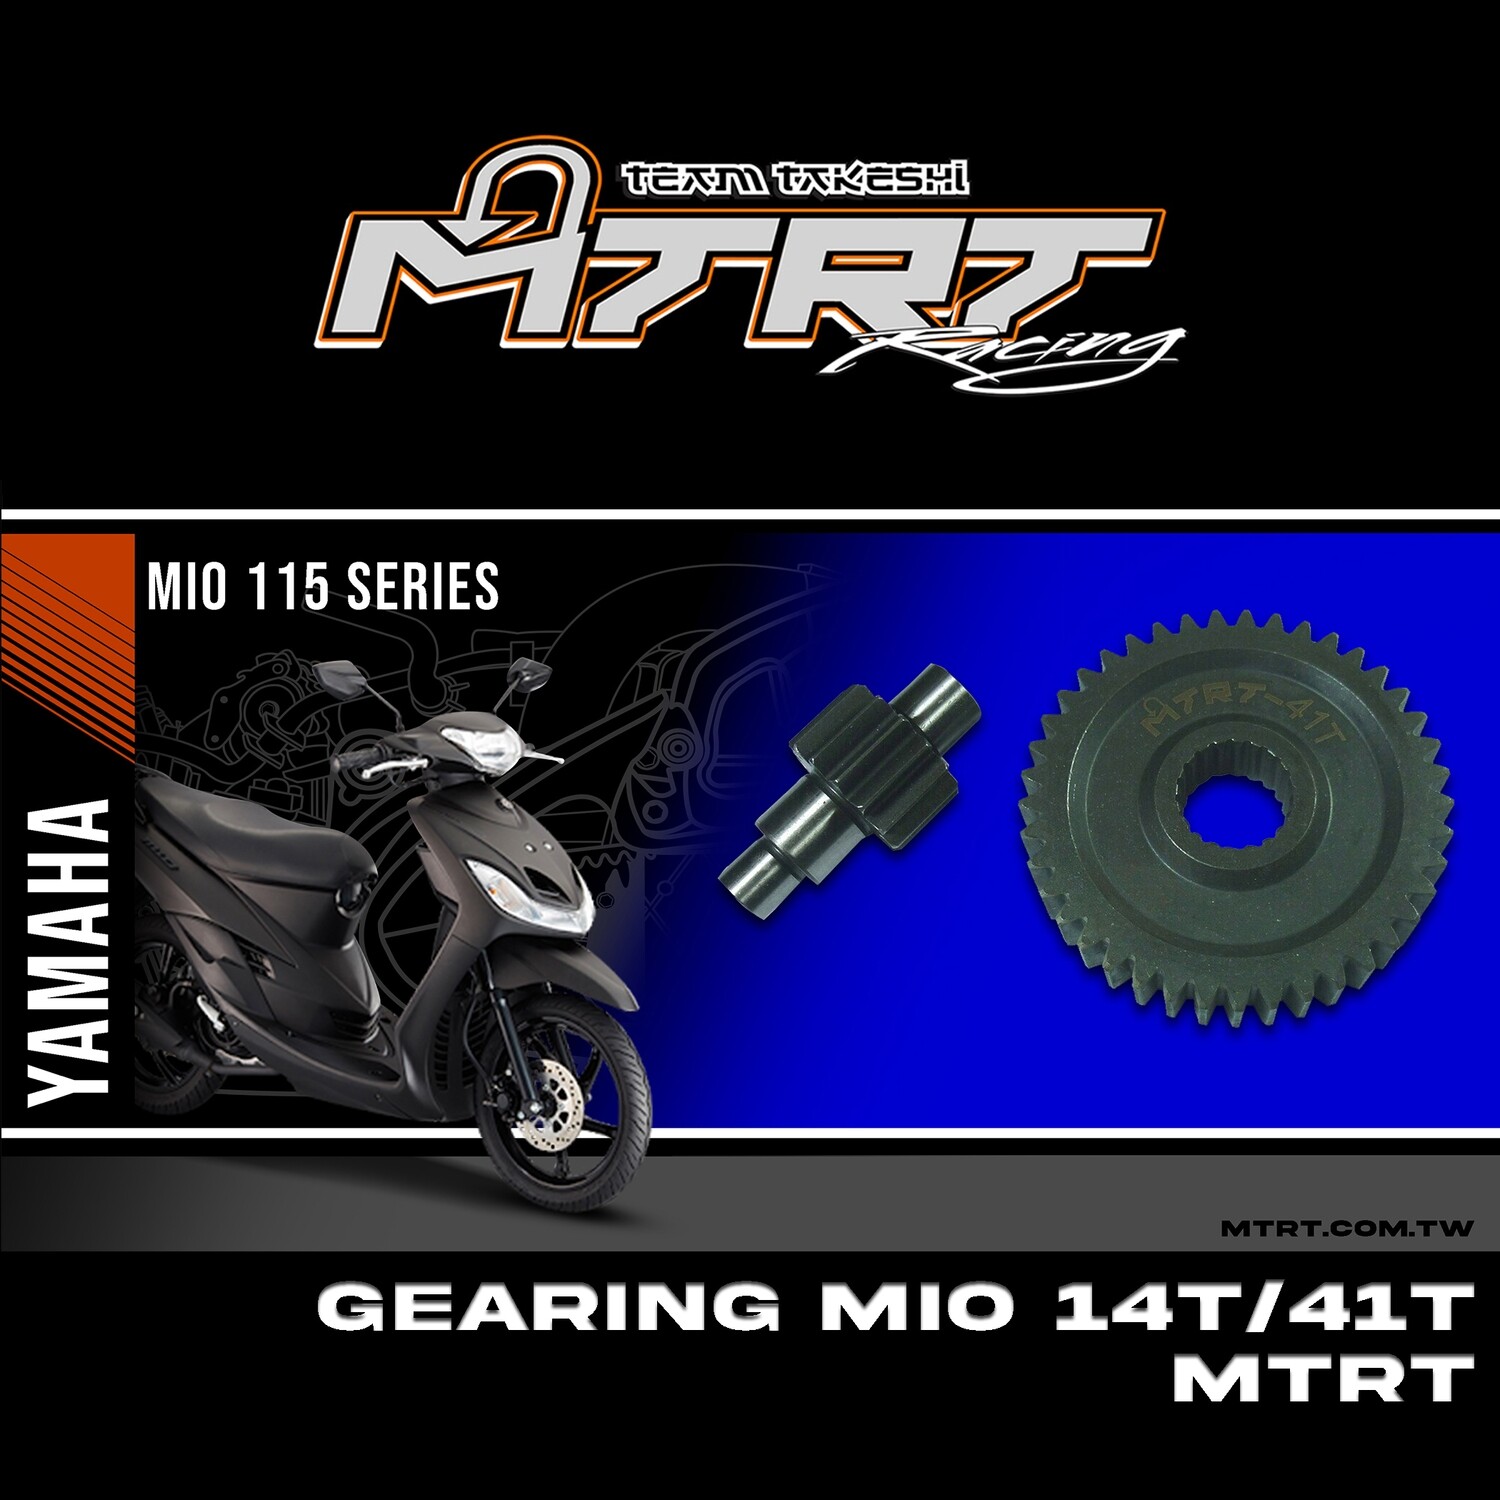 GEARING  MIO  14T/41T  MTRT